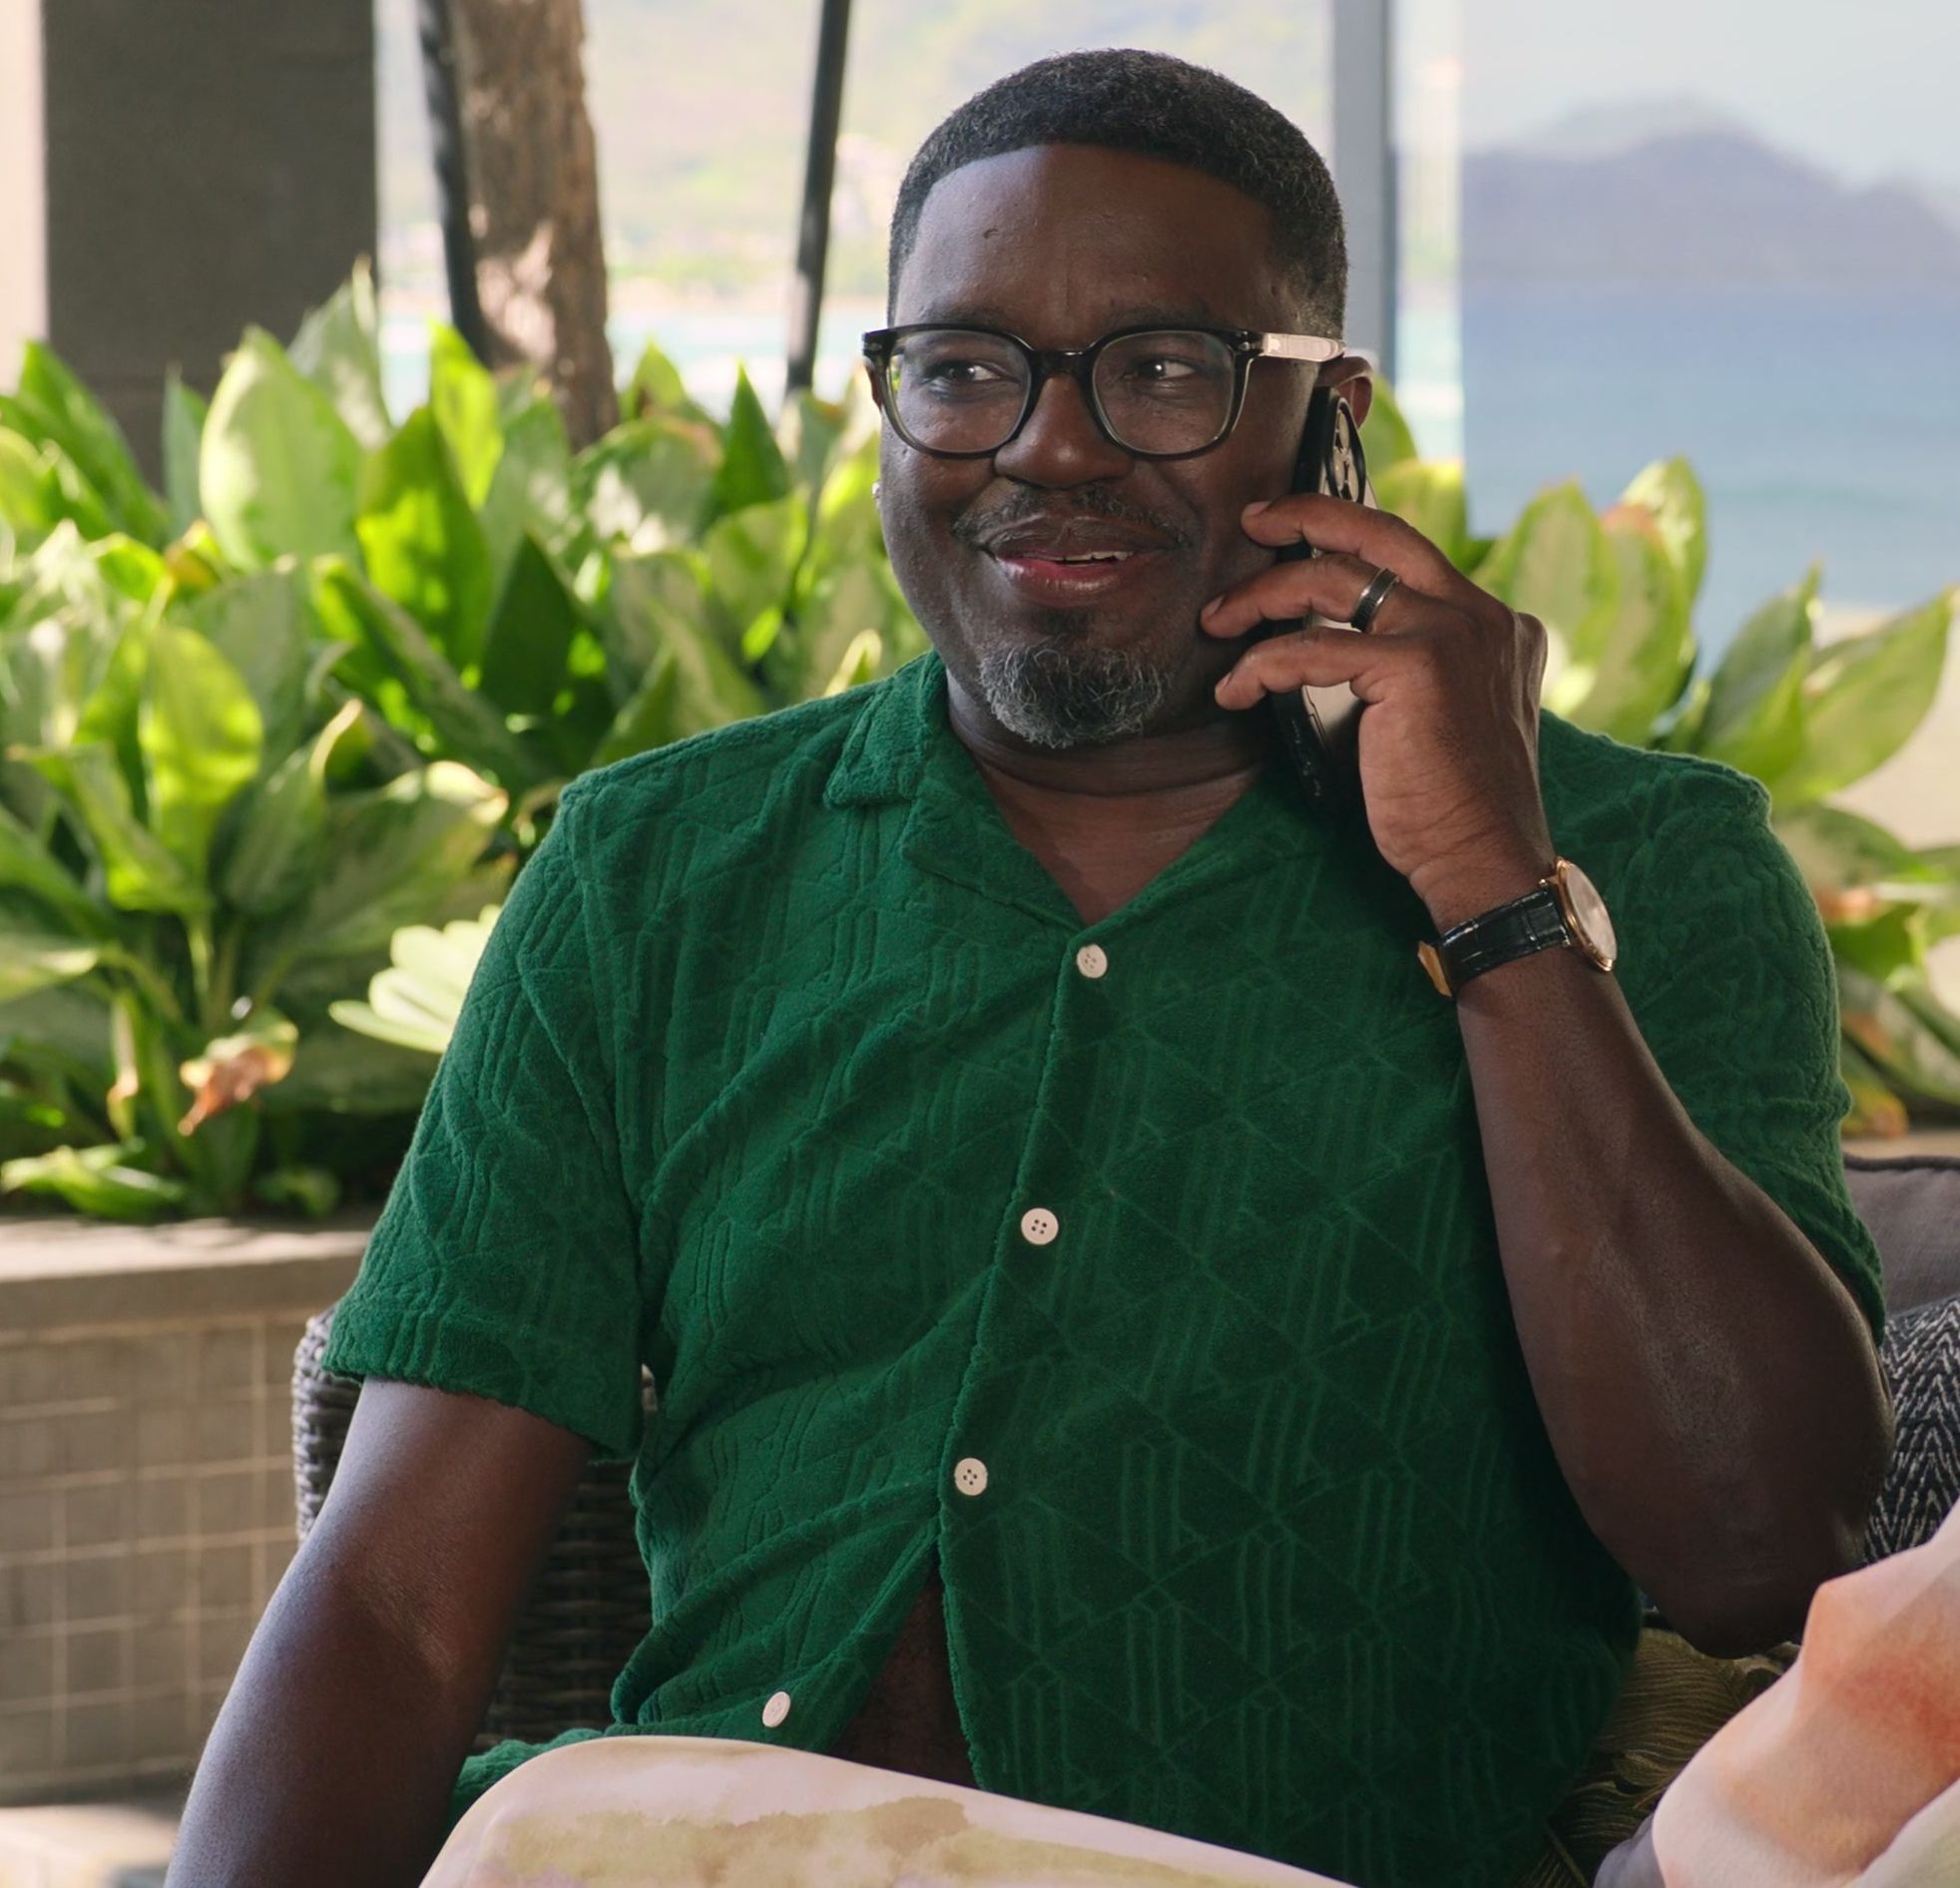 Worn on Vacation Friends 2 (2023) Movie - Green Polo Shirt of Lil Rel Howery as Marcus